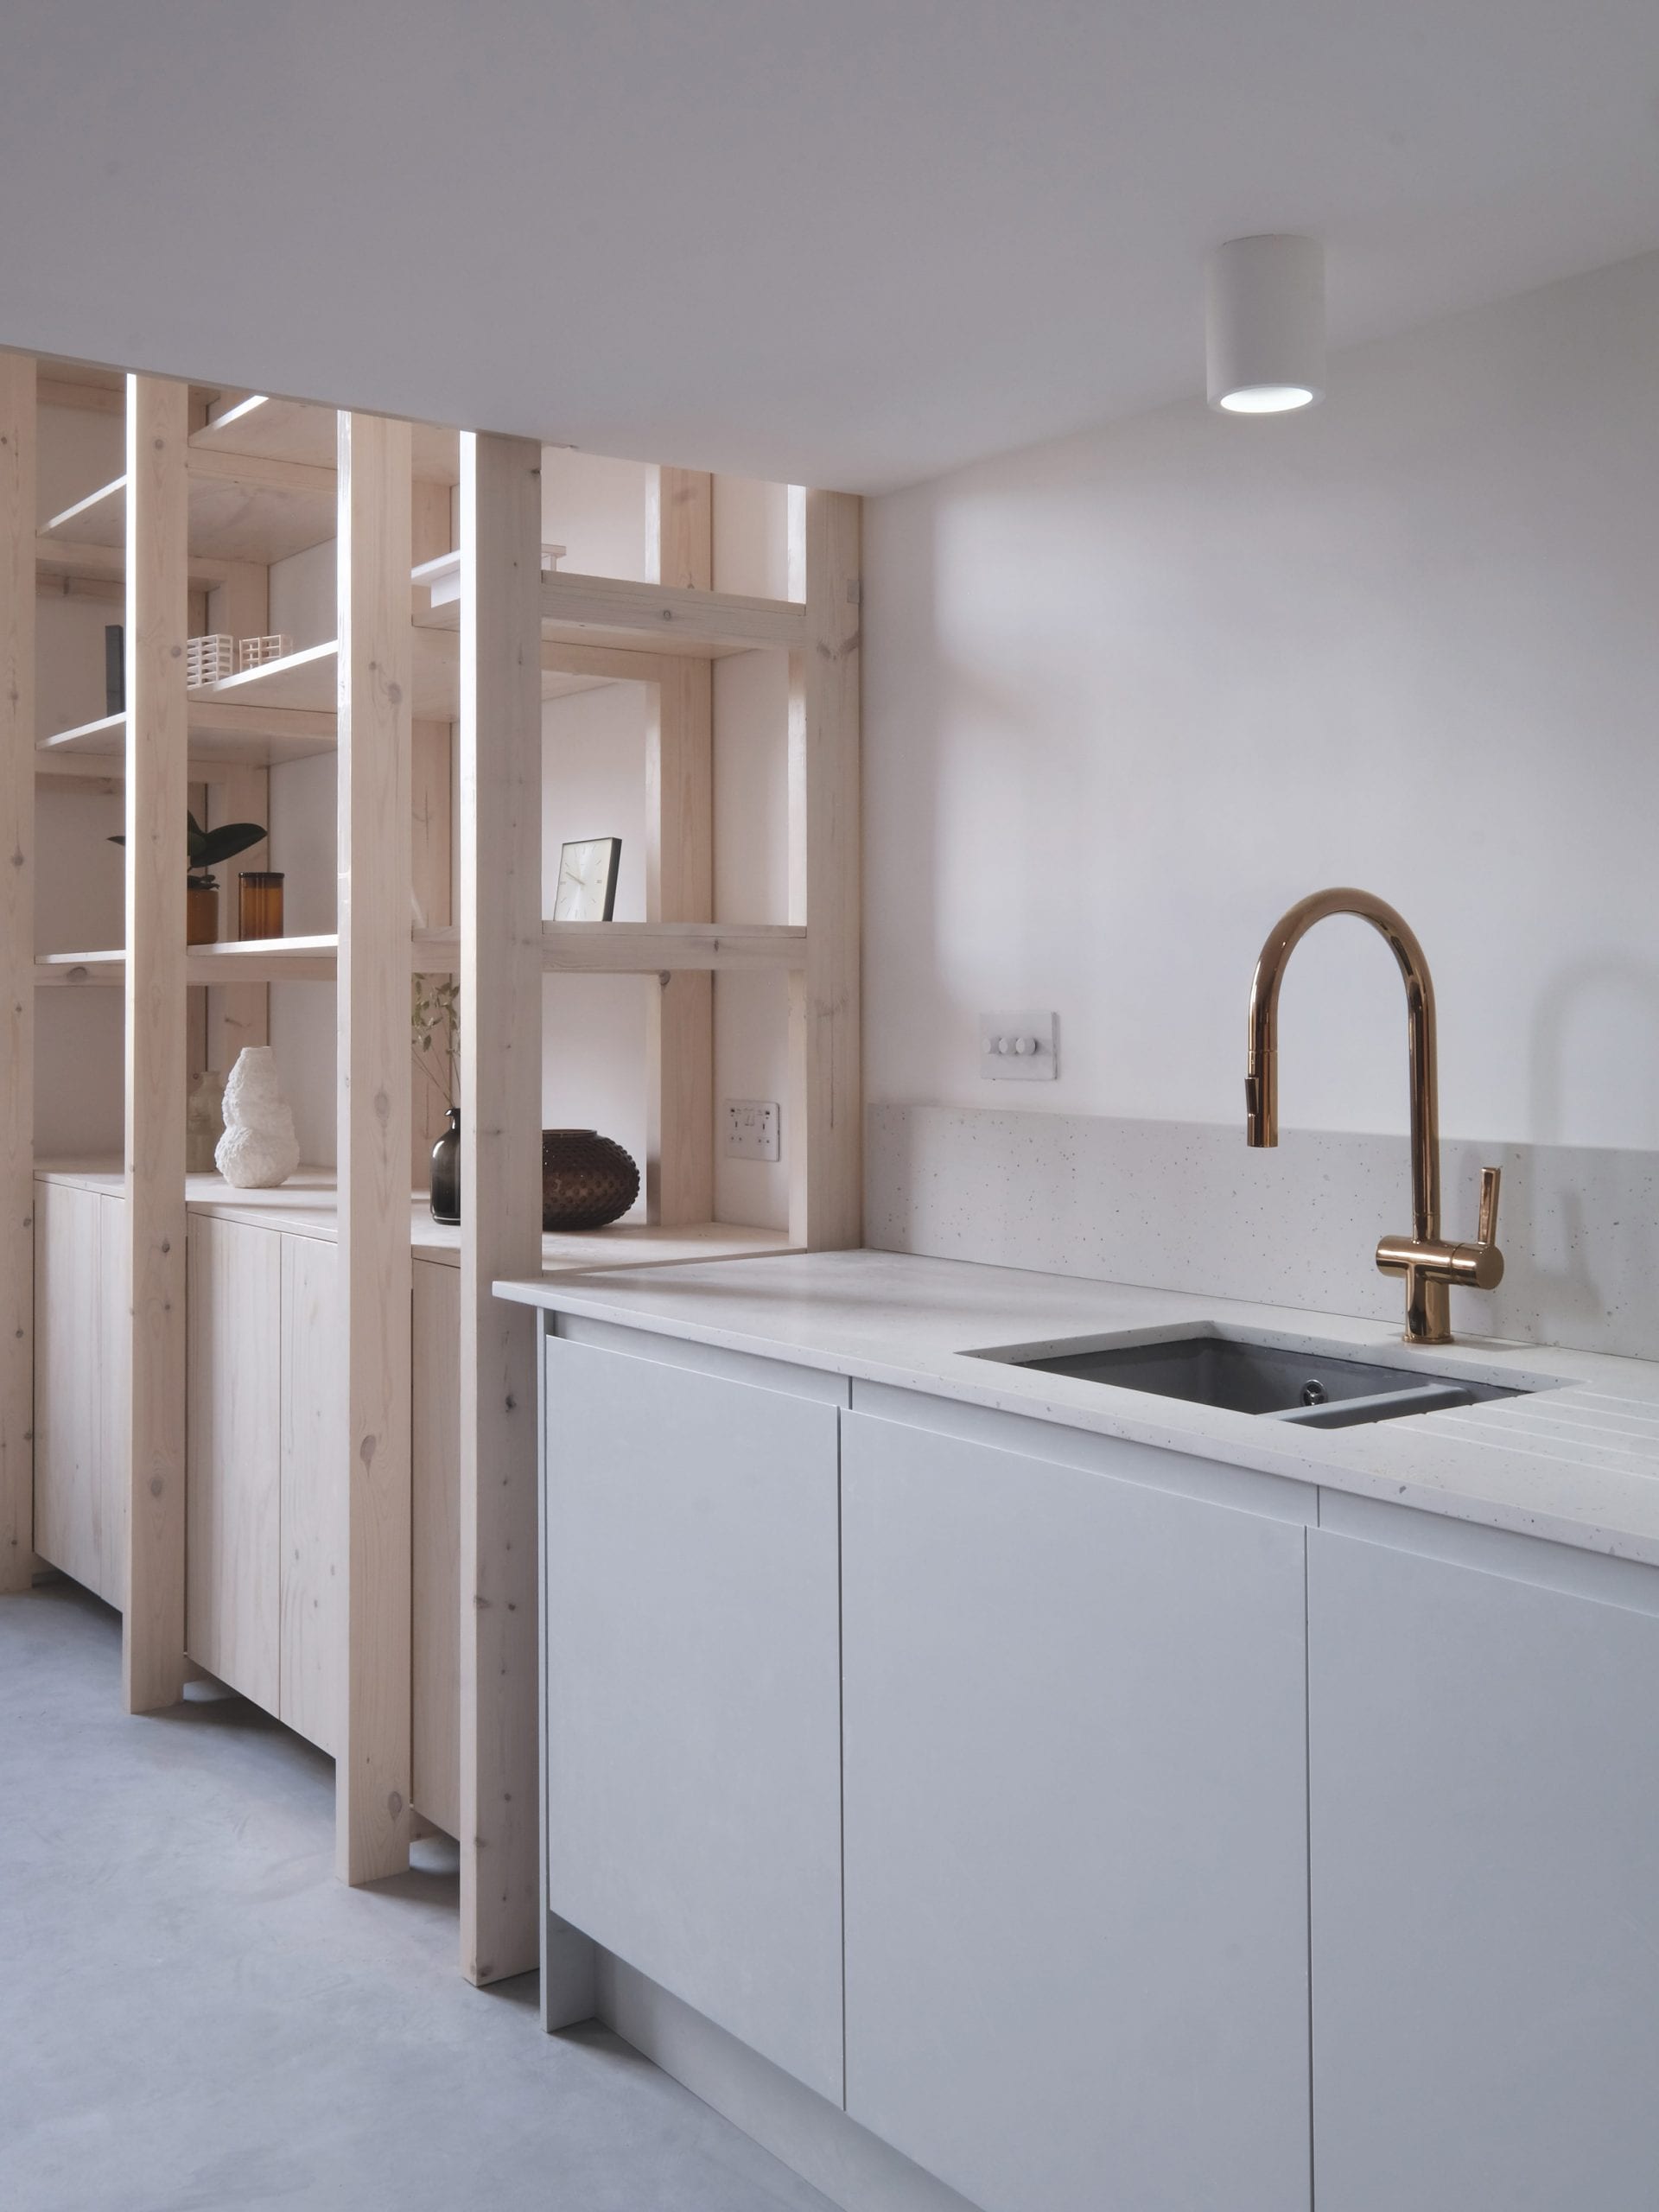 EBBA Architects used clean lines in this one-wall kitchen